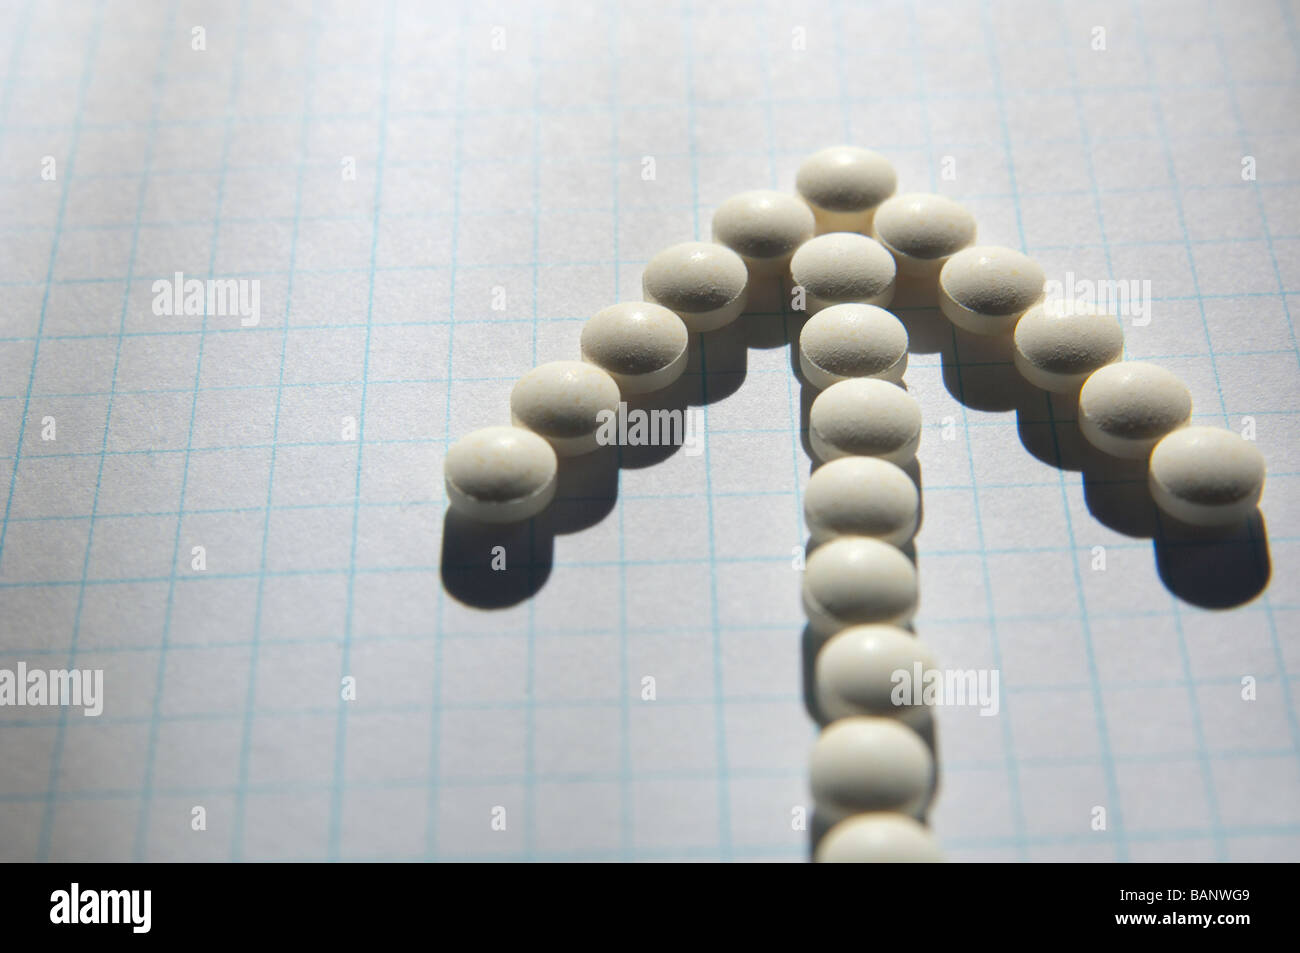 Folic acid pills on graph paper aligned to form an arrow pointer. Stock Photo